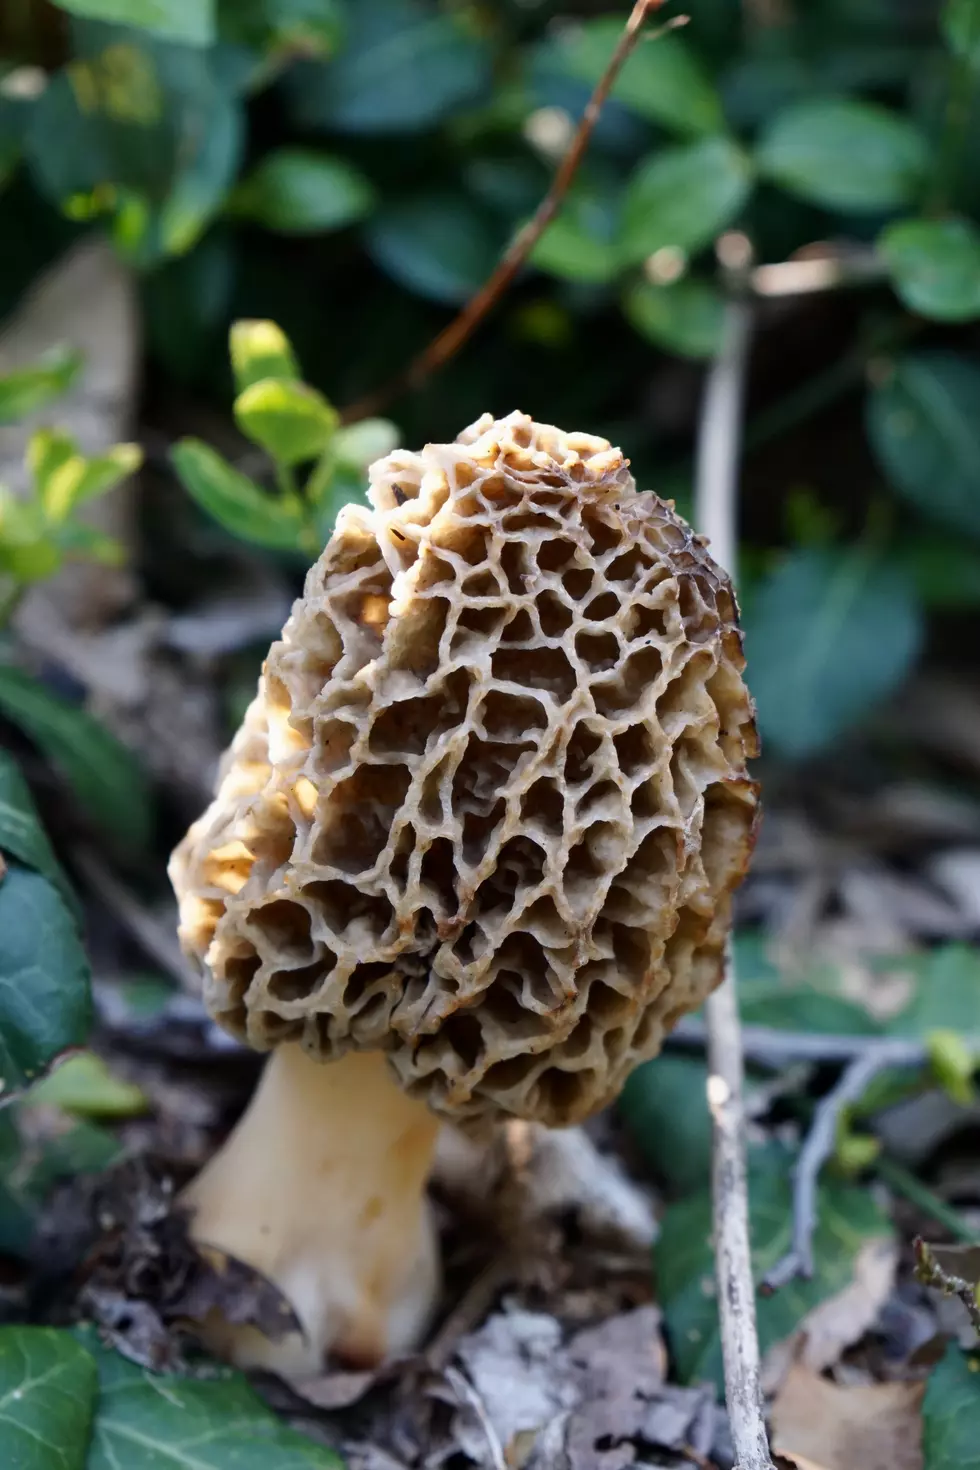 More Morel Mushroom Sightings Could Be On The Way in Iowa